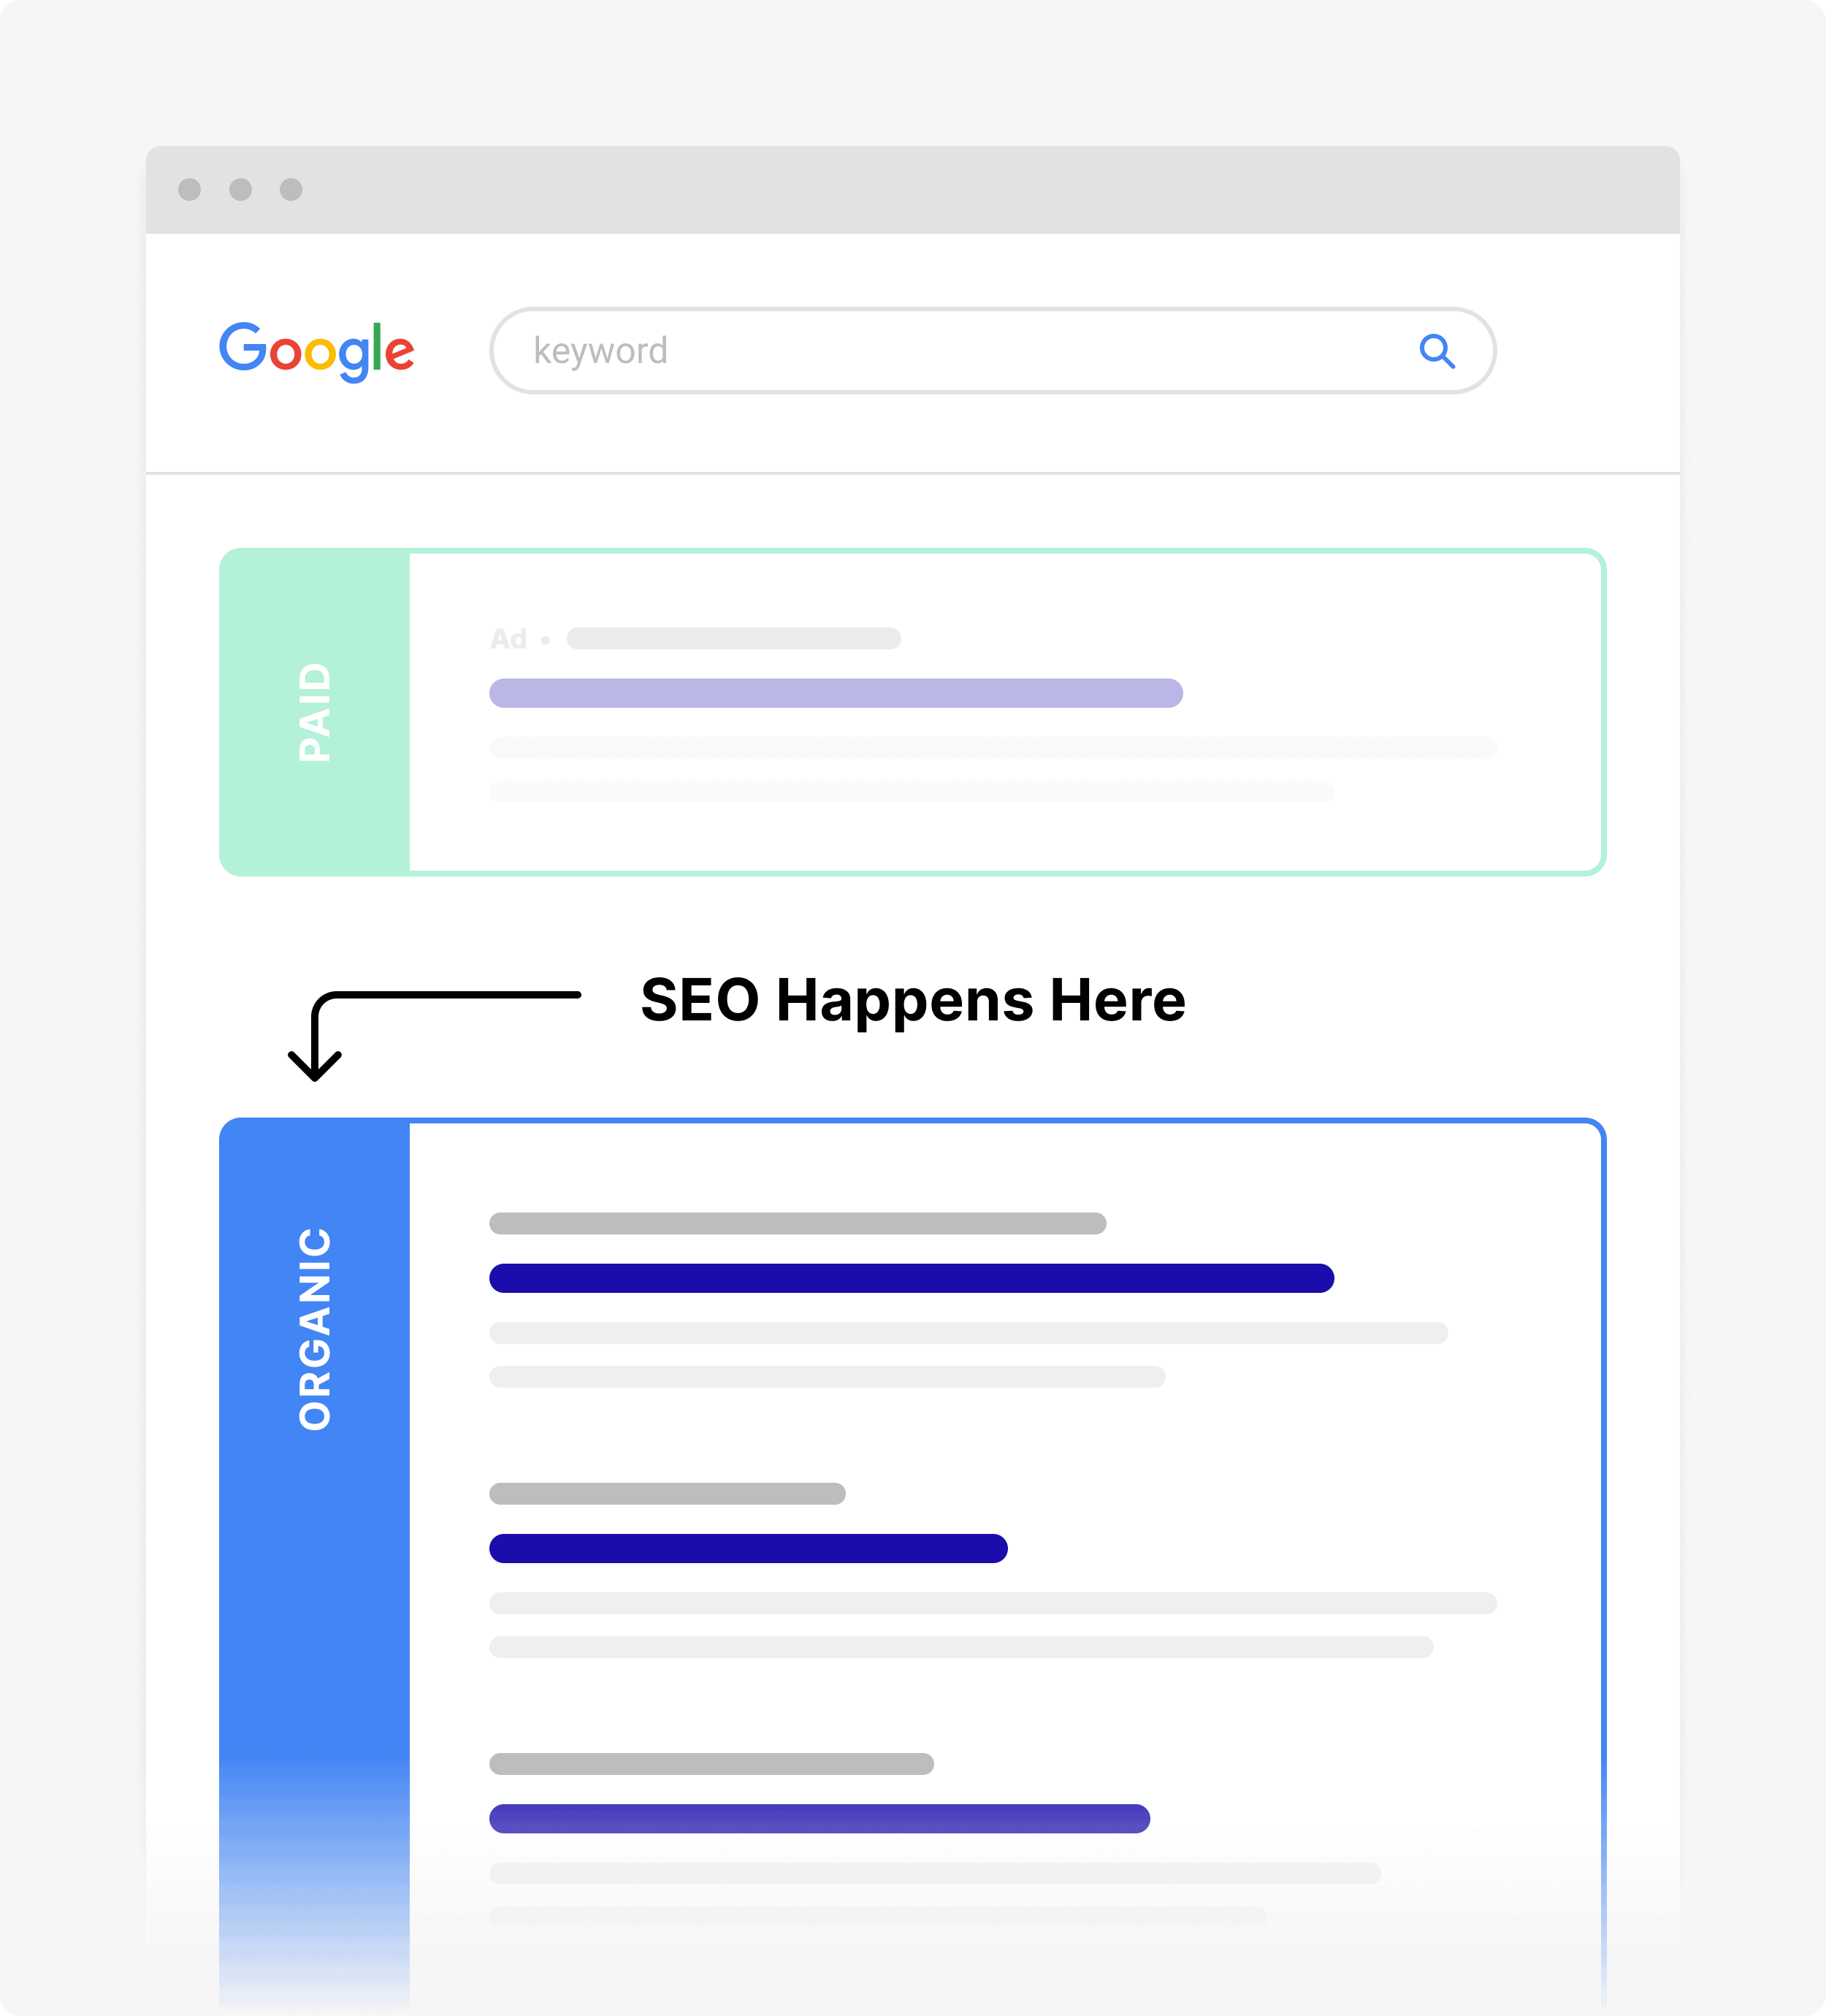 SEO is about improving a site's organic ranking